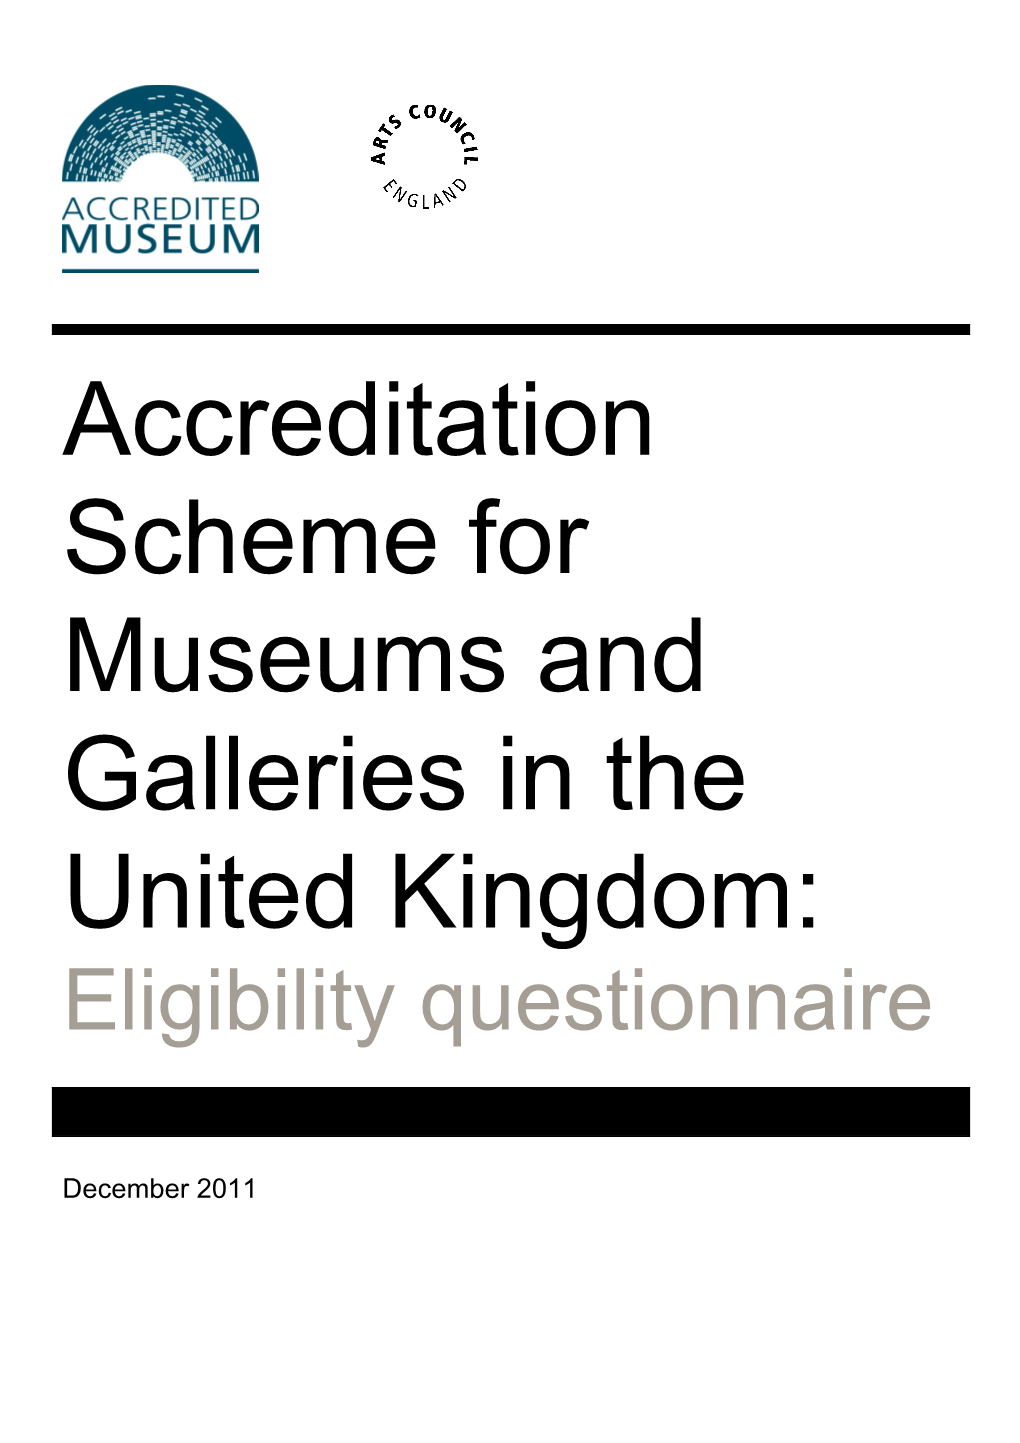 Accreditation Scheme for Museums and Galleries in the United Kingdom